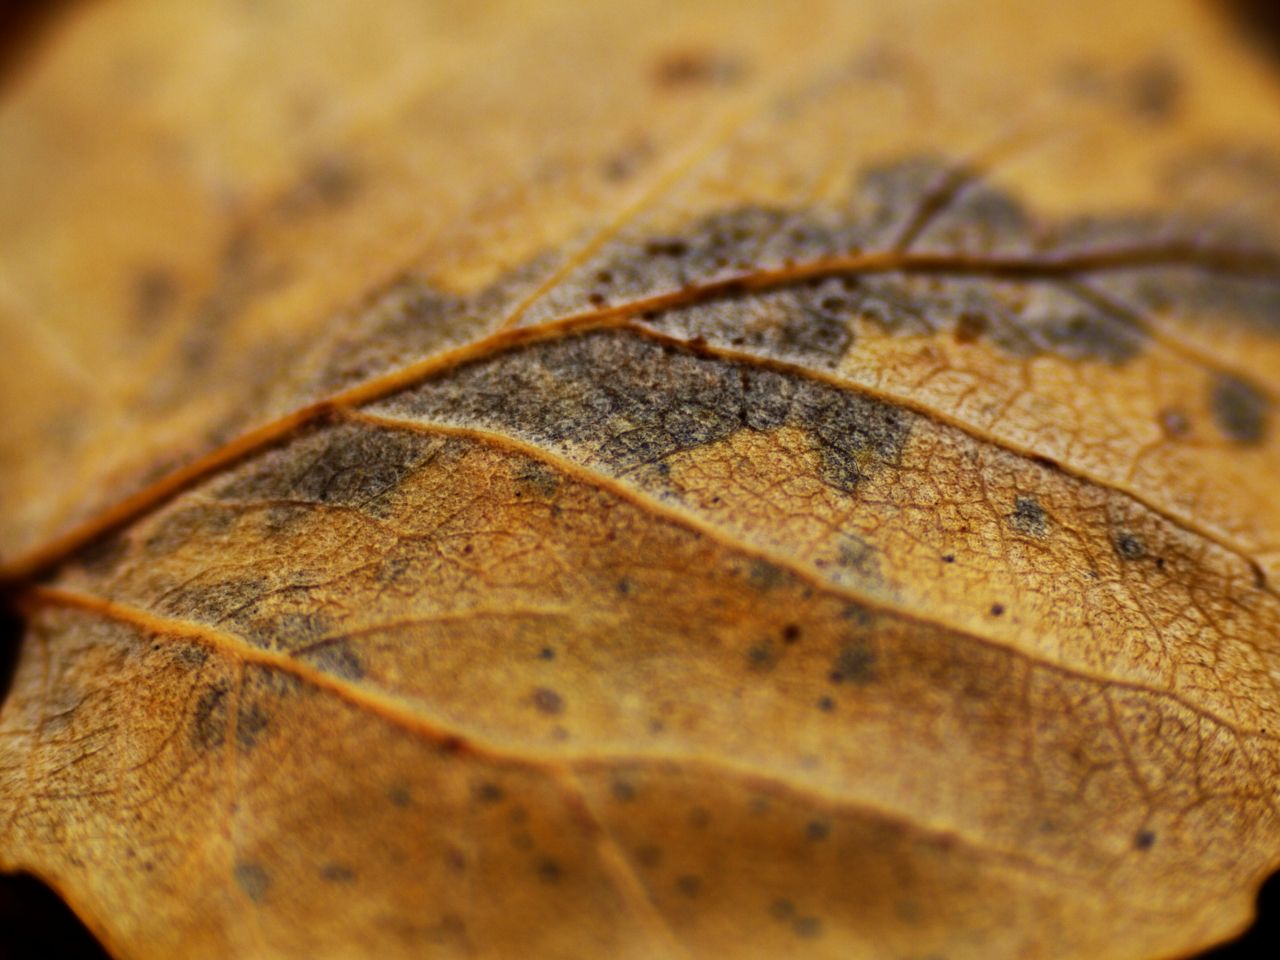 11357065006 - dying autumn leaf with prominent veins.jpg